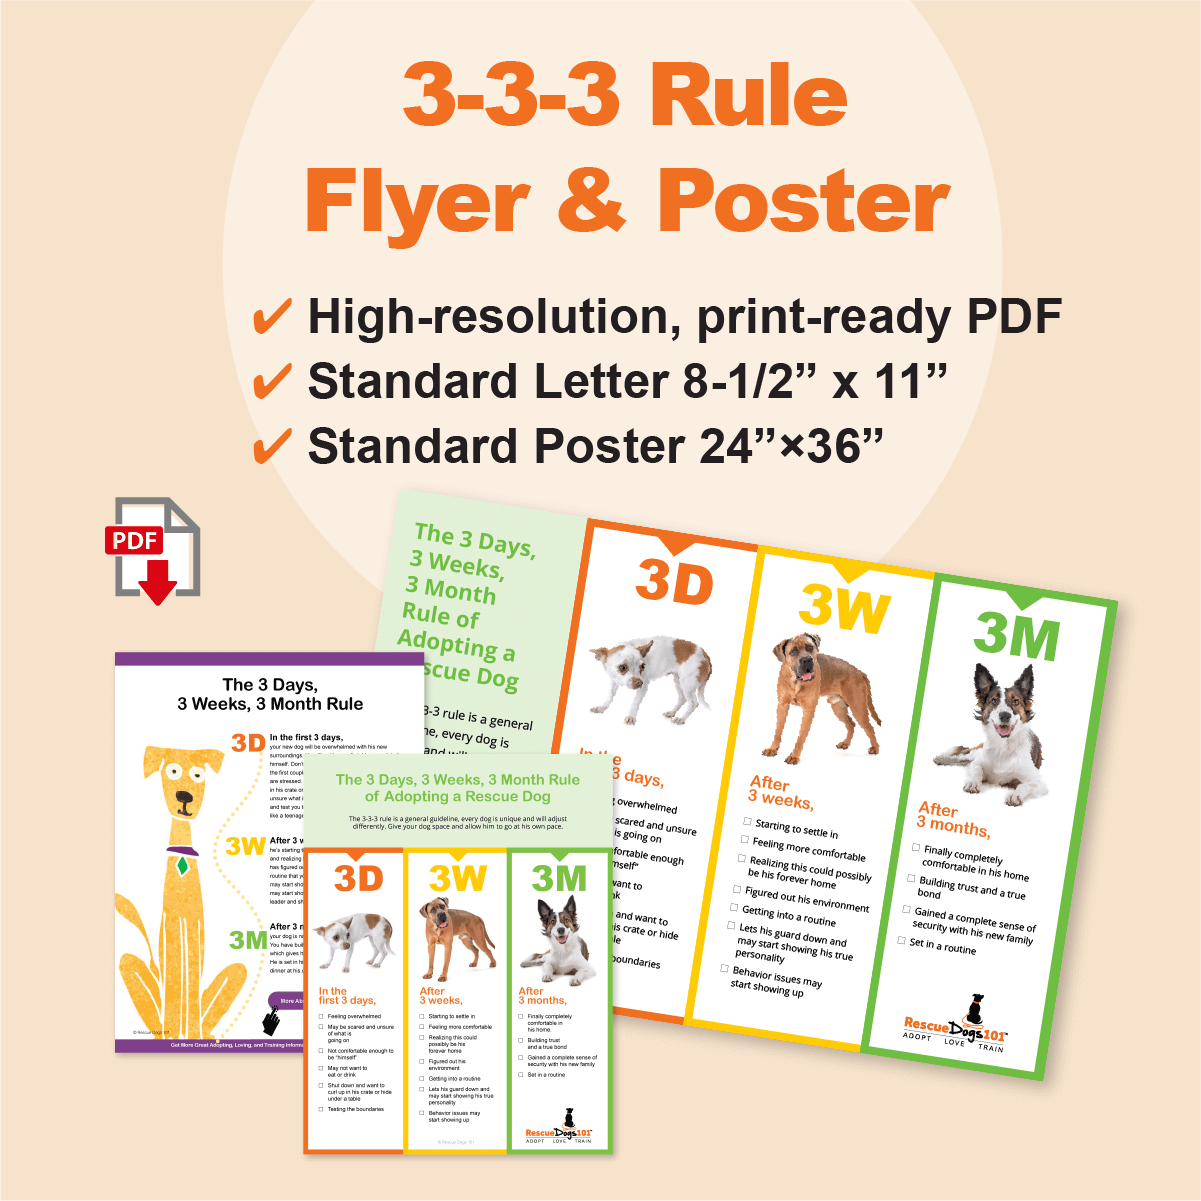 3-3-3 rule flyer and poster